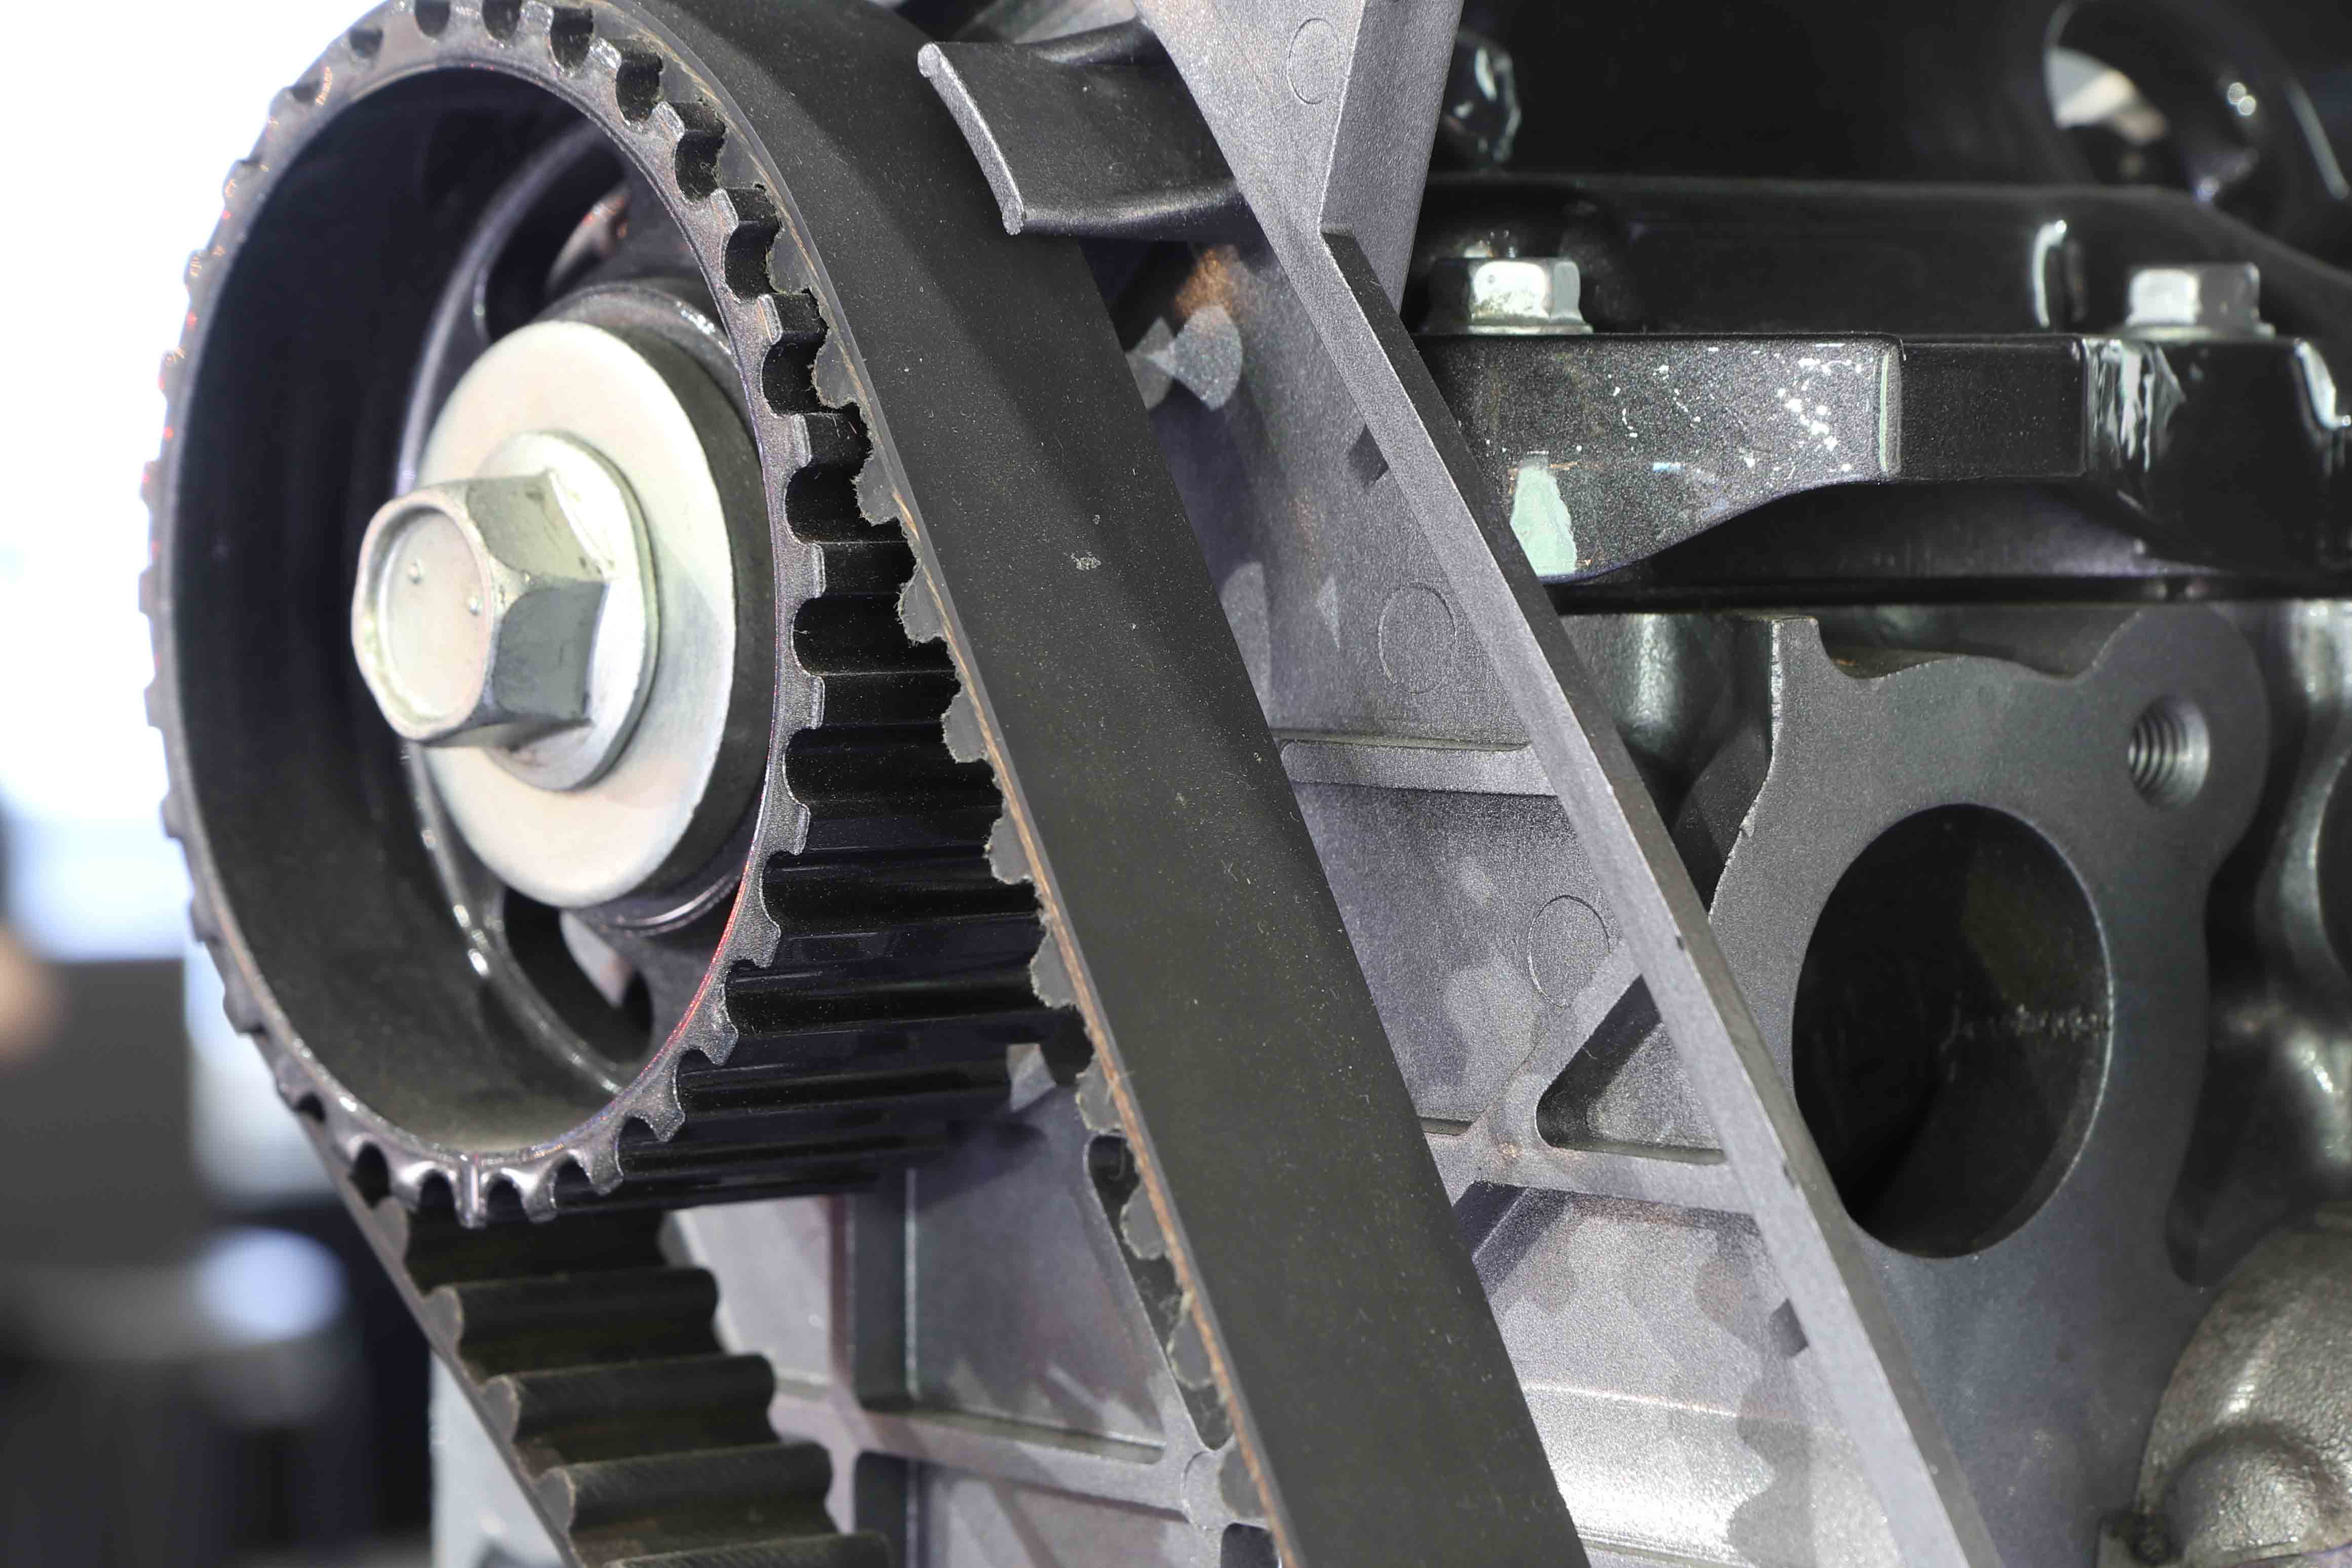 Which is Better: Gear Drive or Belt and Pulley Drive System